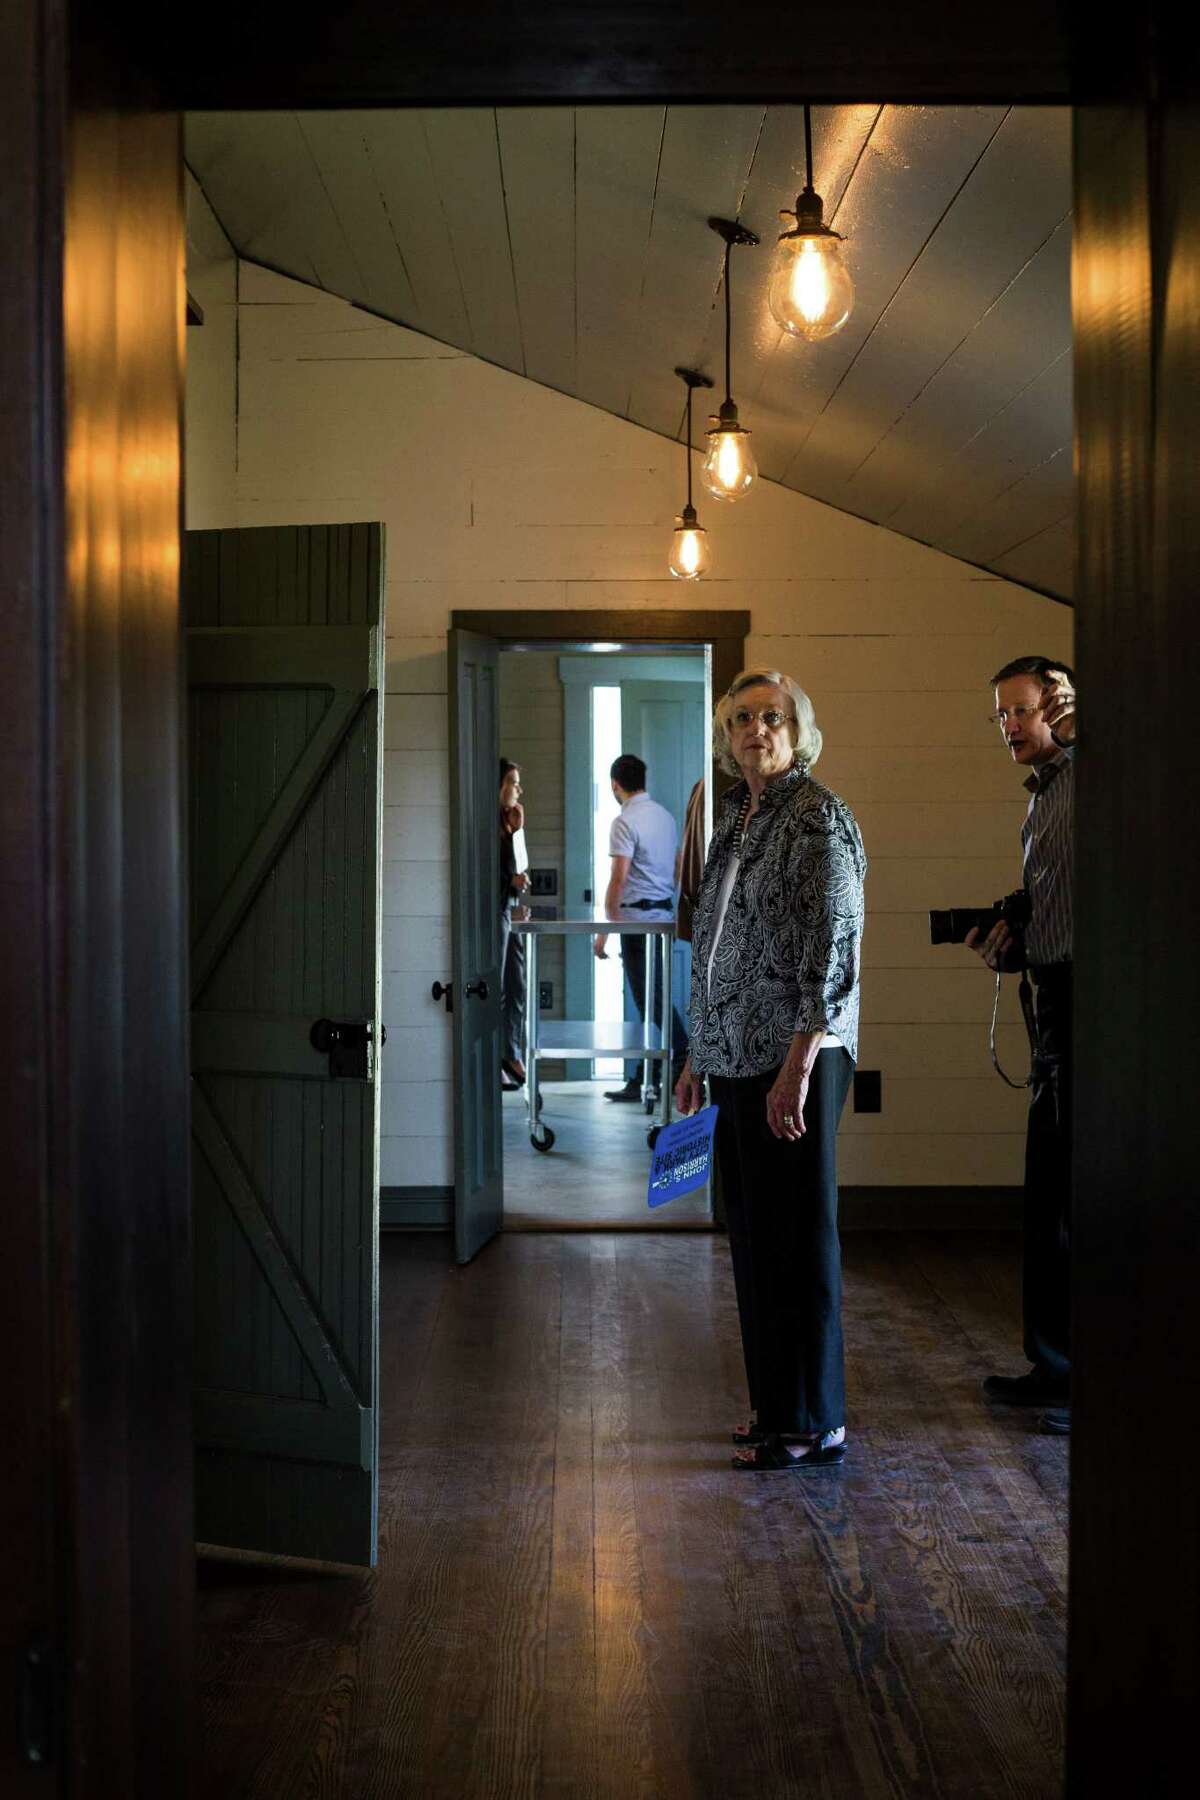 Carol Carpenter studies the room as her son, Scott Carpenter, shows her around during the public opening of the John S. Harrison House in Selma, on Wednesday, August 10, 2016. The house, built in 1852, is on the National Registry of Historic Places and was recently part of a $1.2 million restoration project. Scott of 7th Generation Design in San Antonio, was the architect on the project and it was his mother's first visit.